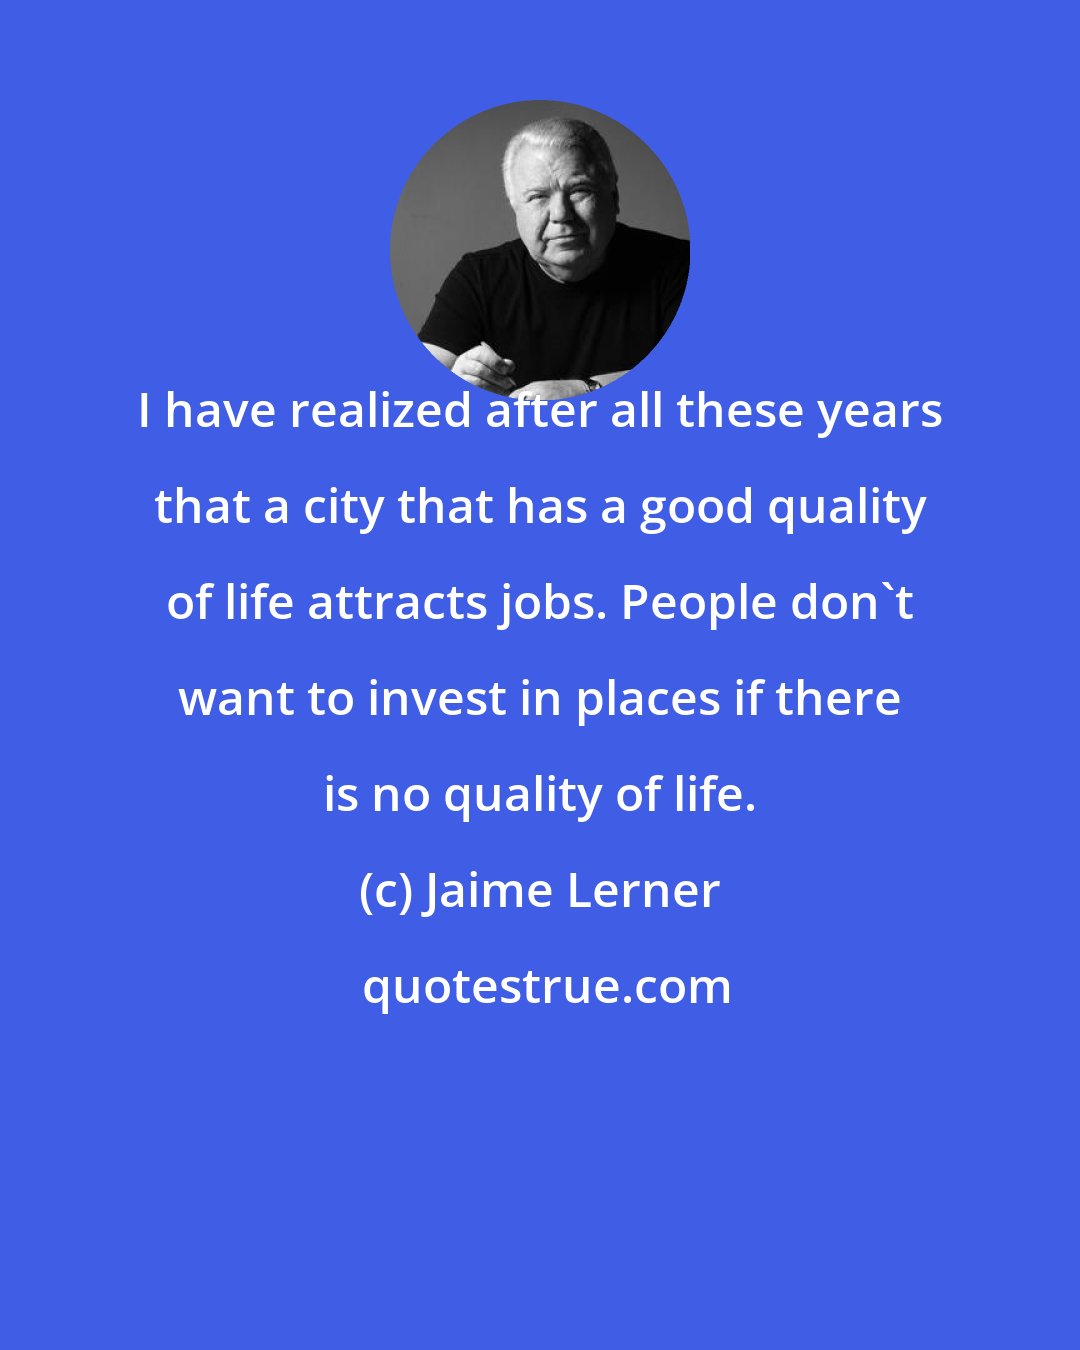 Jaime Lerner: I have realized after all these years that a city that has a good quality of life attracts jobs. People don't want to invest in places if there is no quality of life.